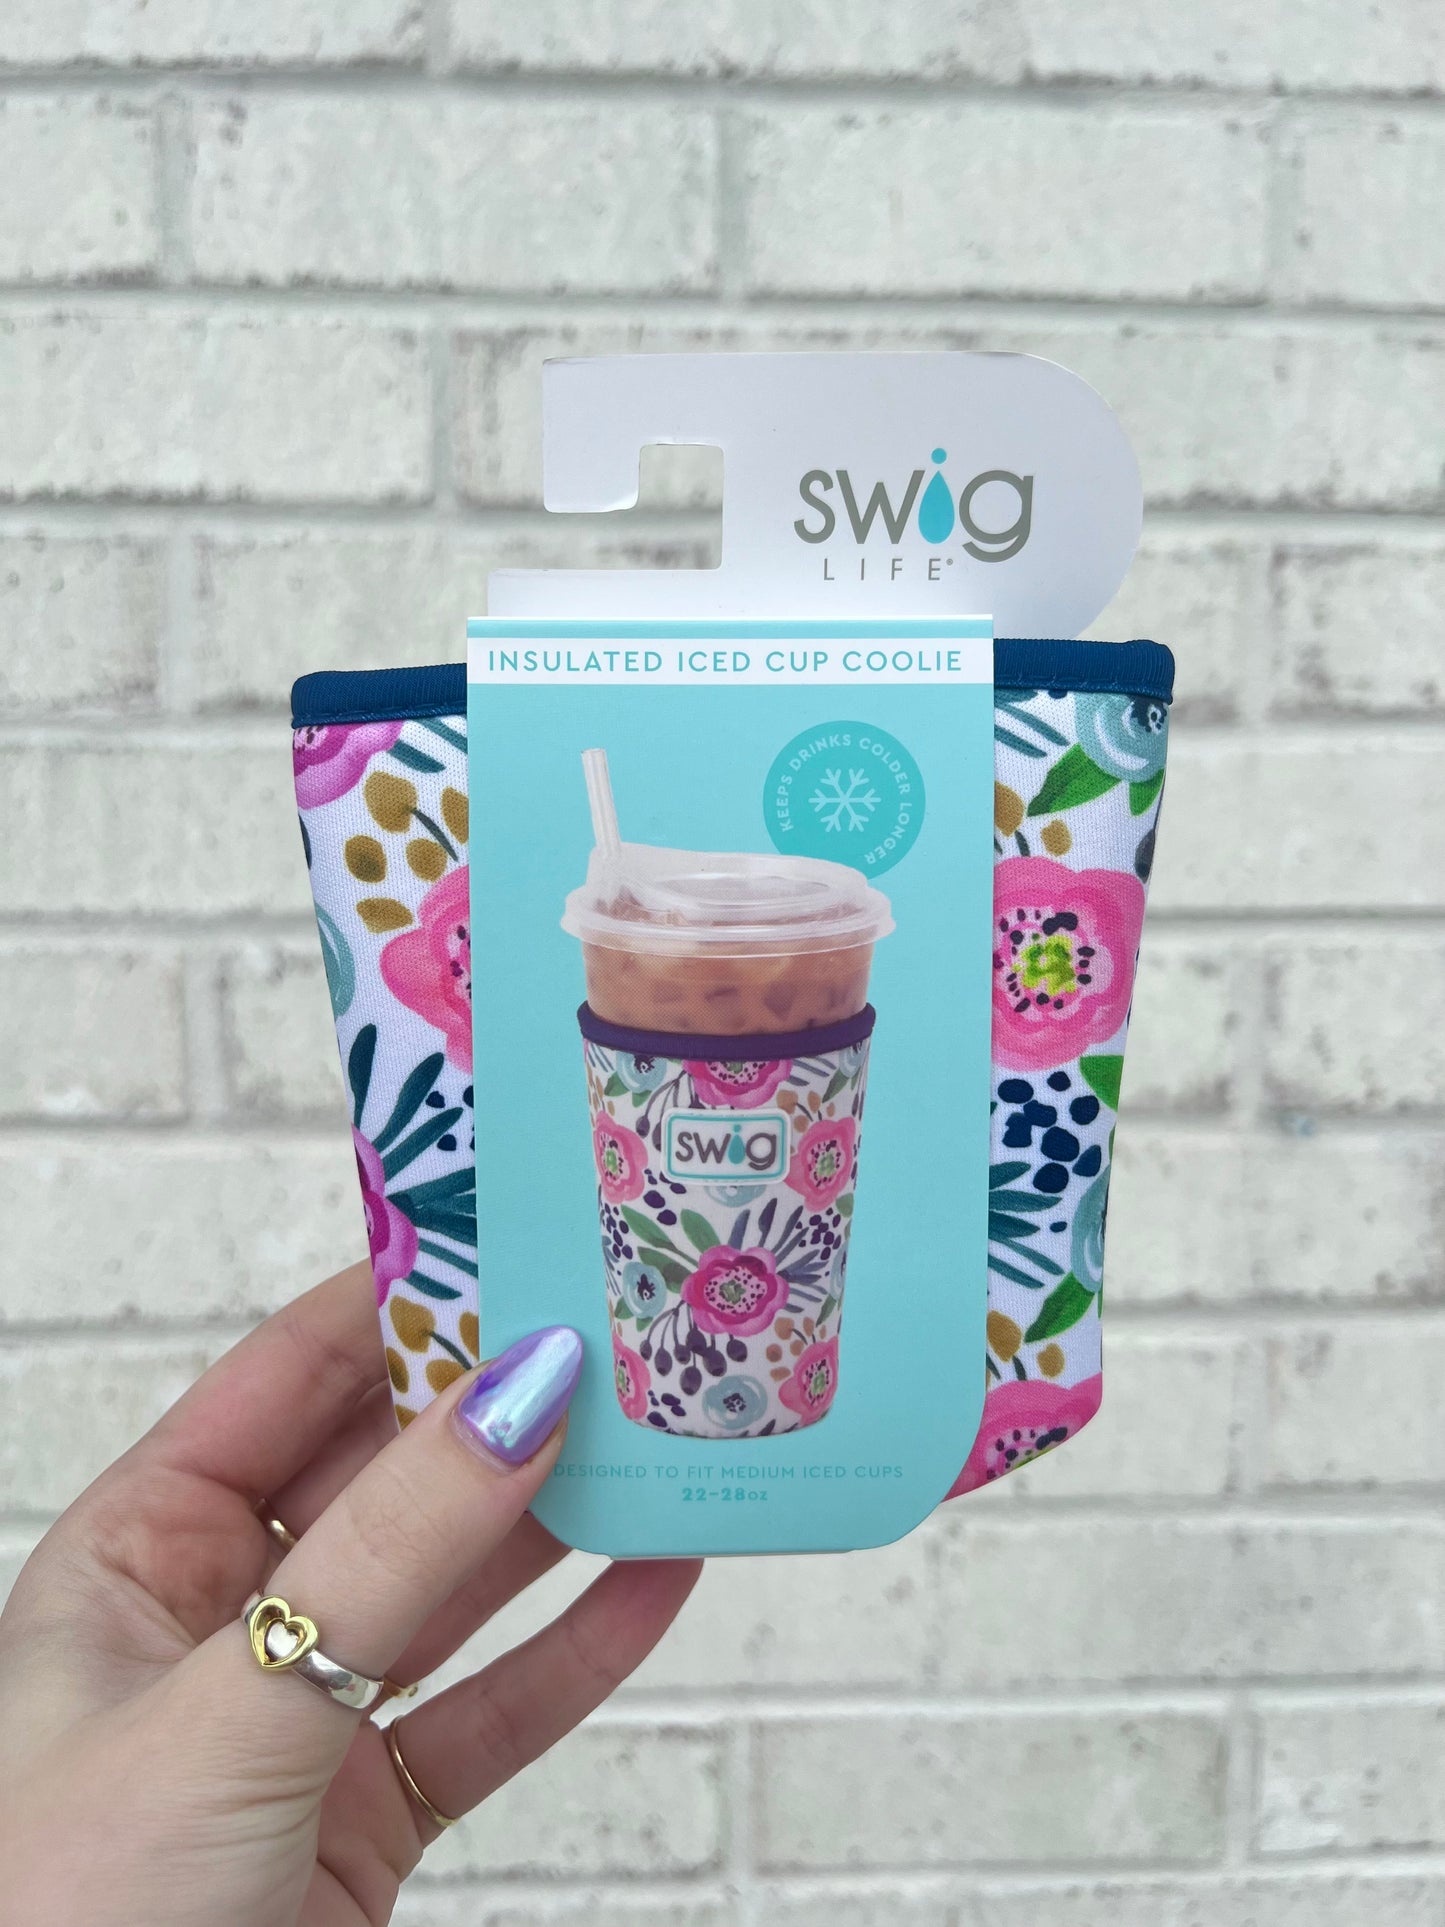 Swig Insulated Iced Cup Coolie